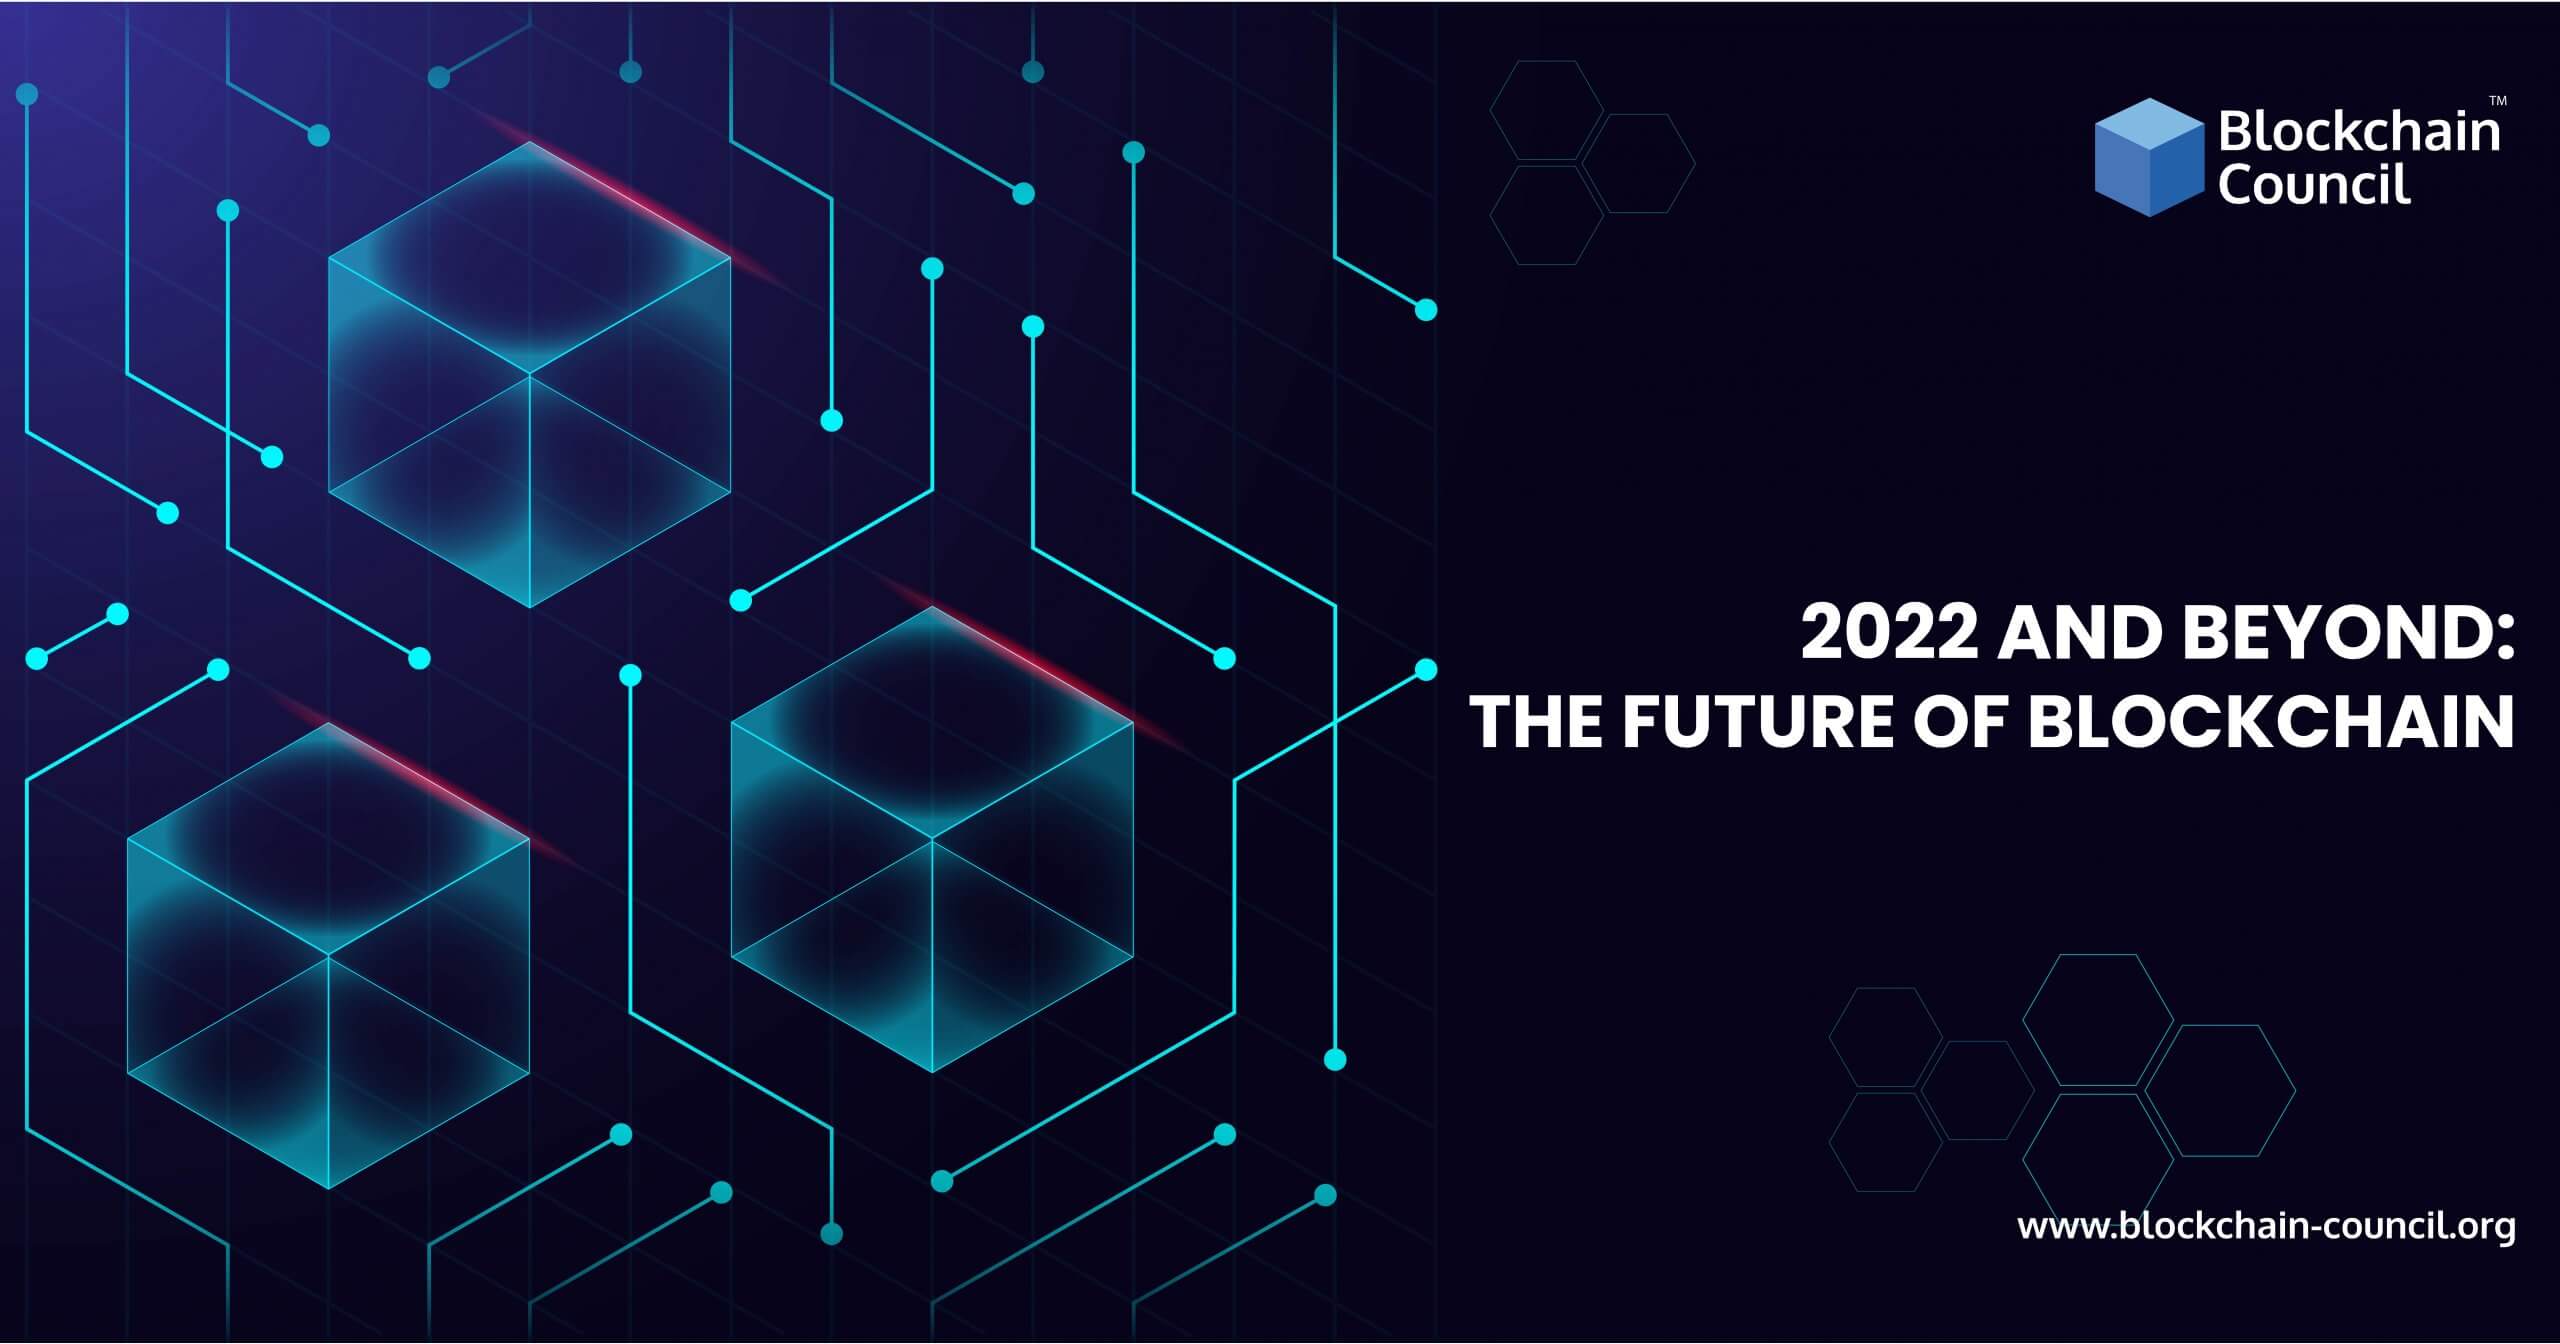 2022 AND BEYOND: THE FUTURE OF BLOCKCHAIN